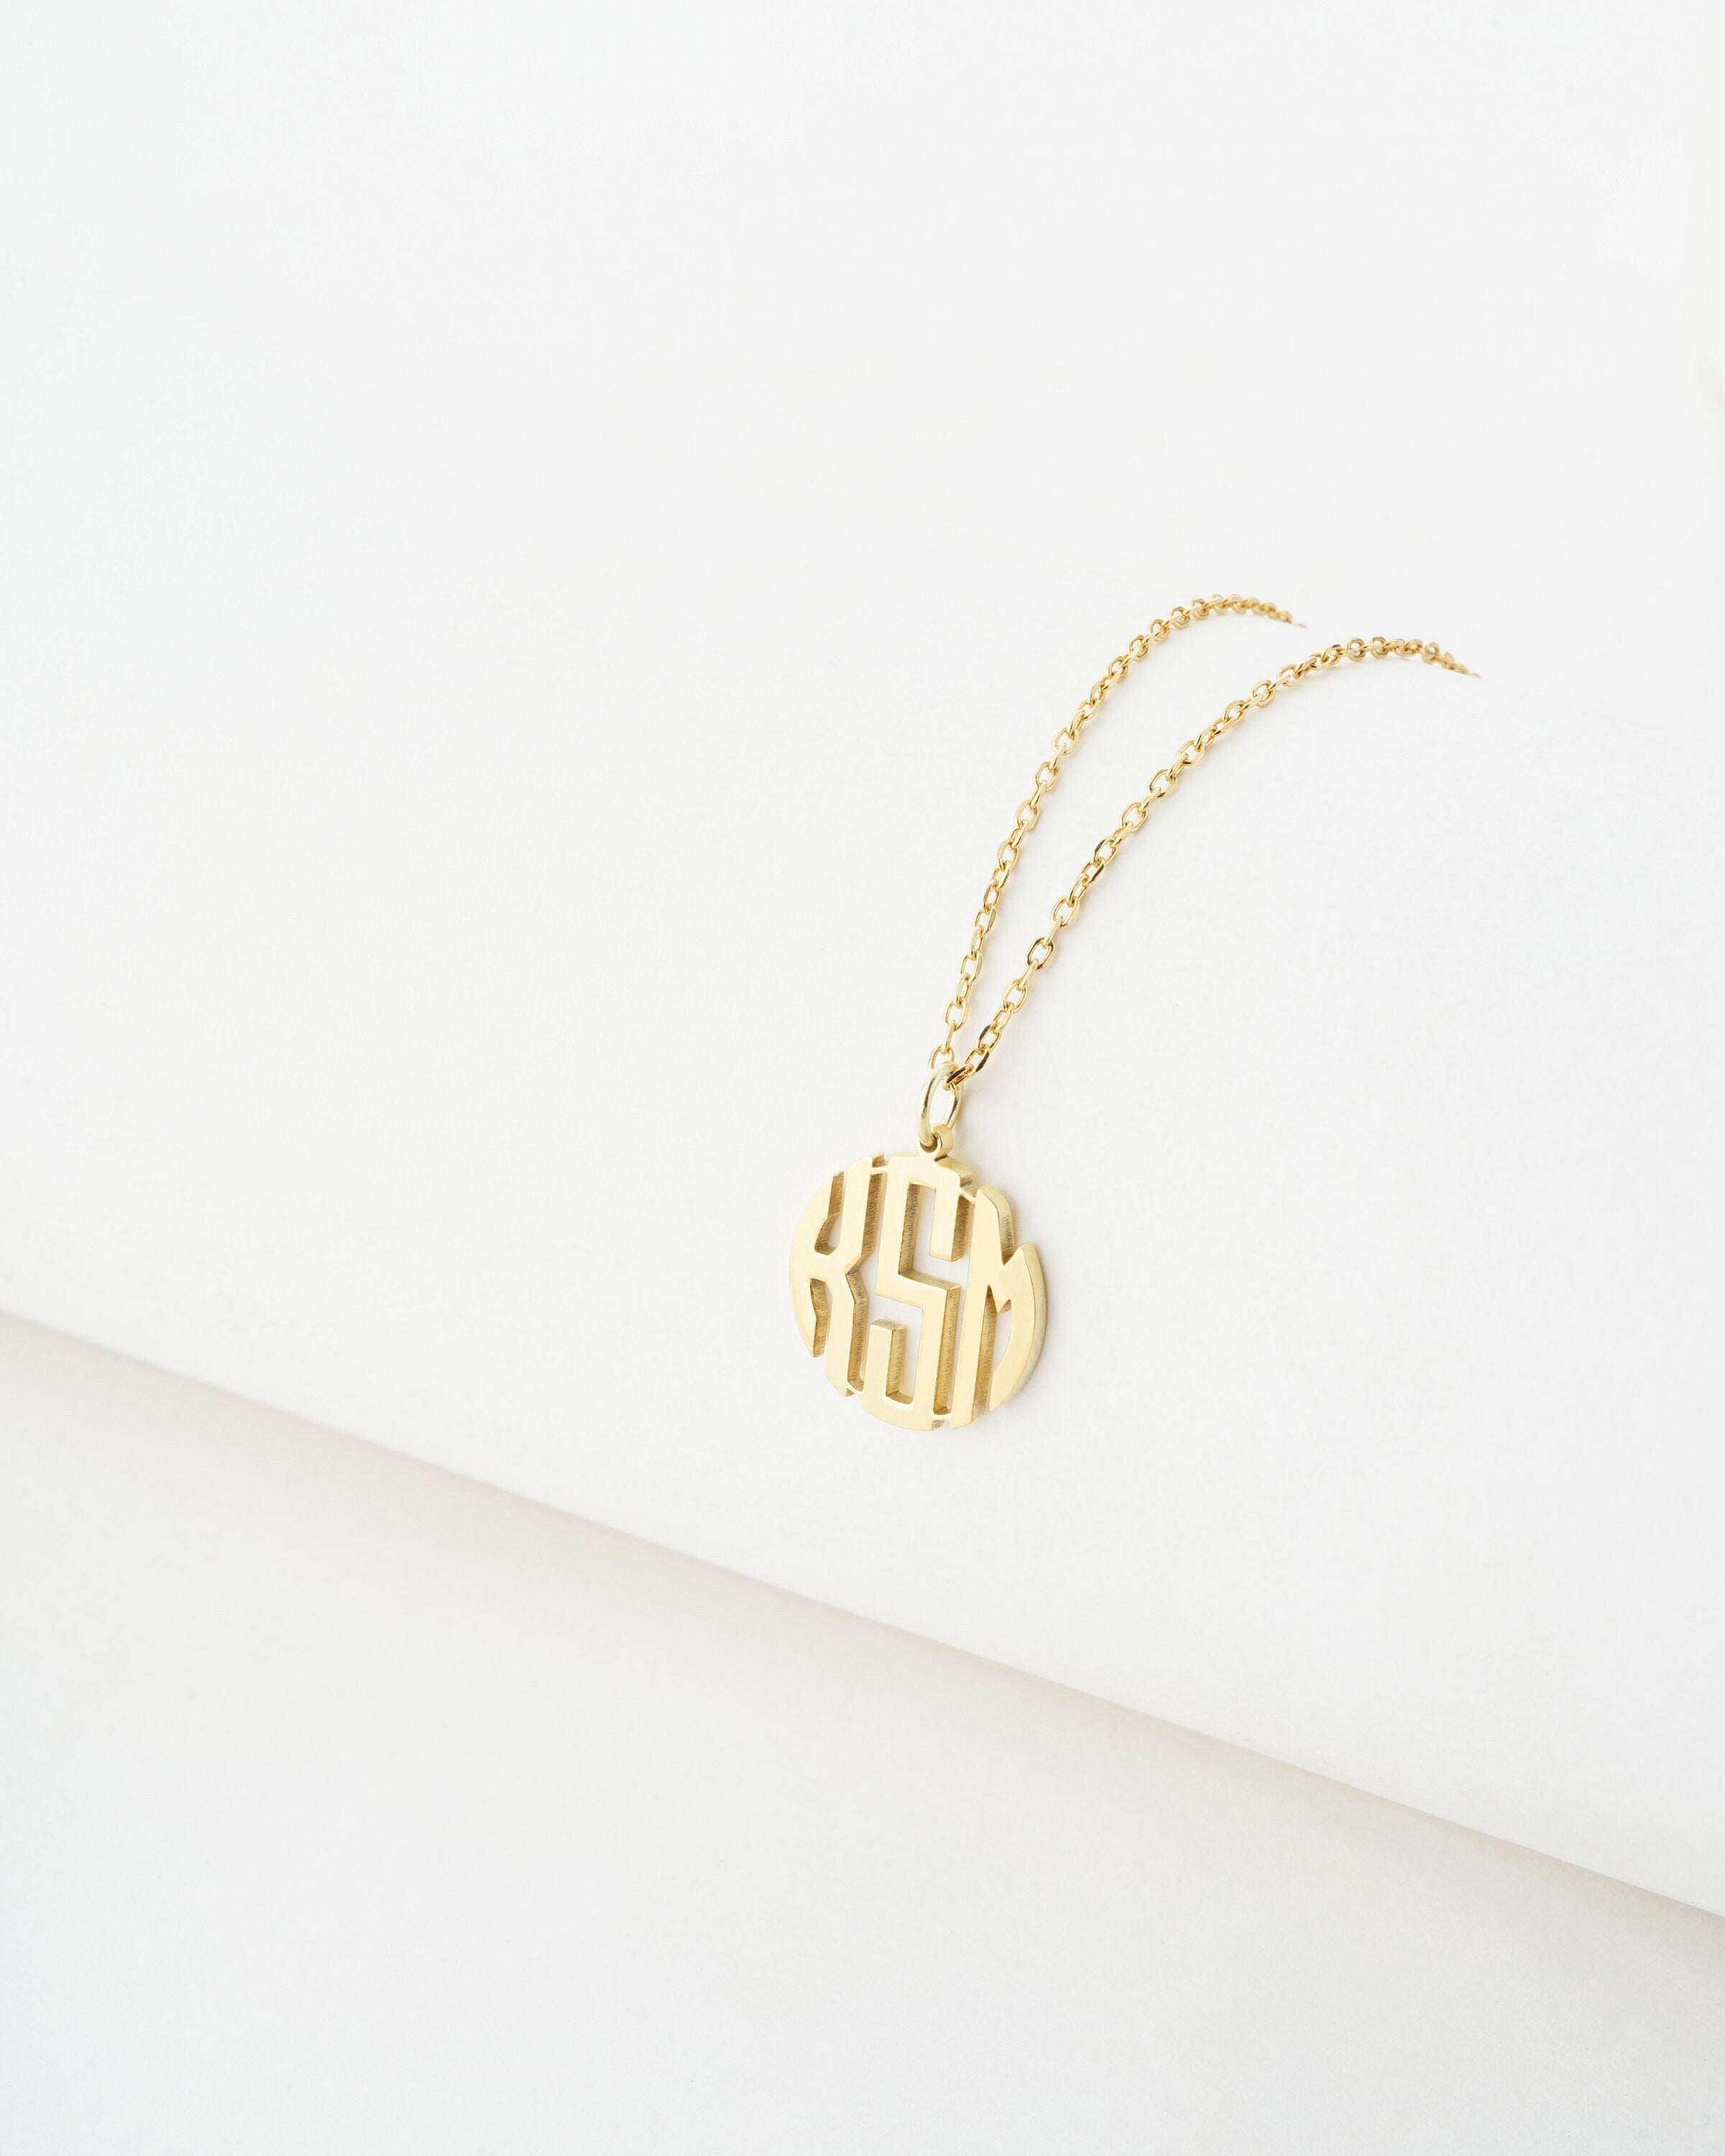 Lily Nily Children's Initial Pendant